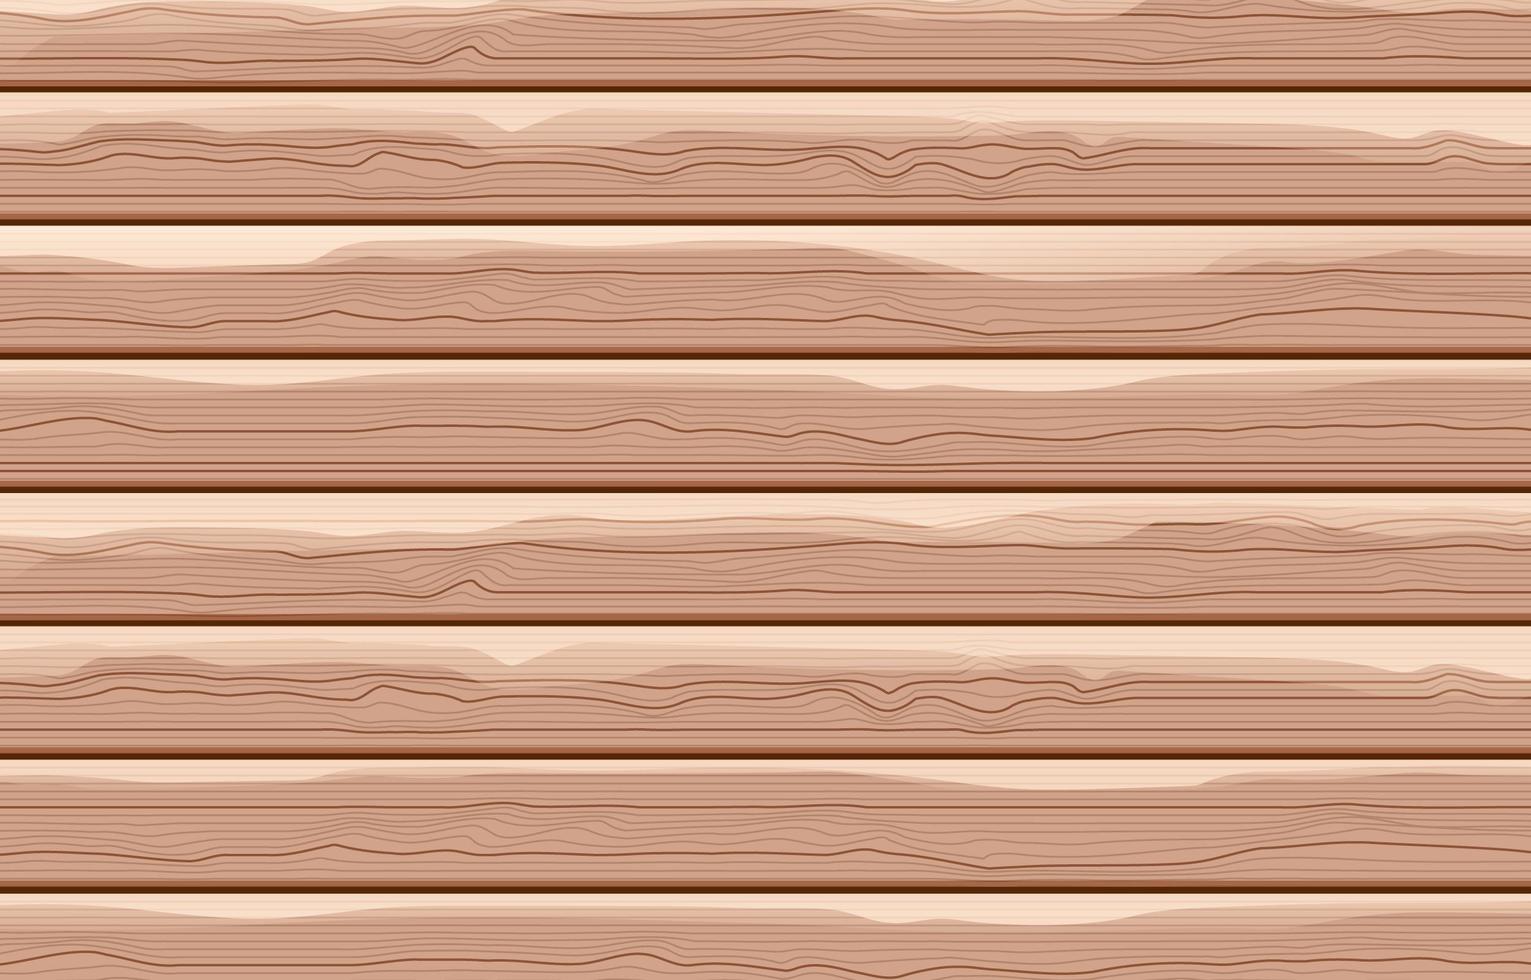 Wood Plank Background vector